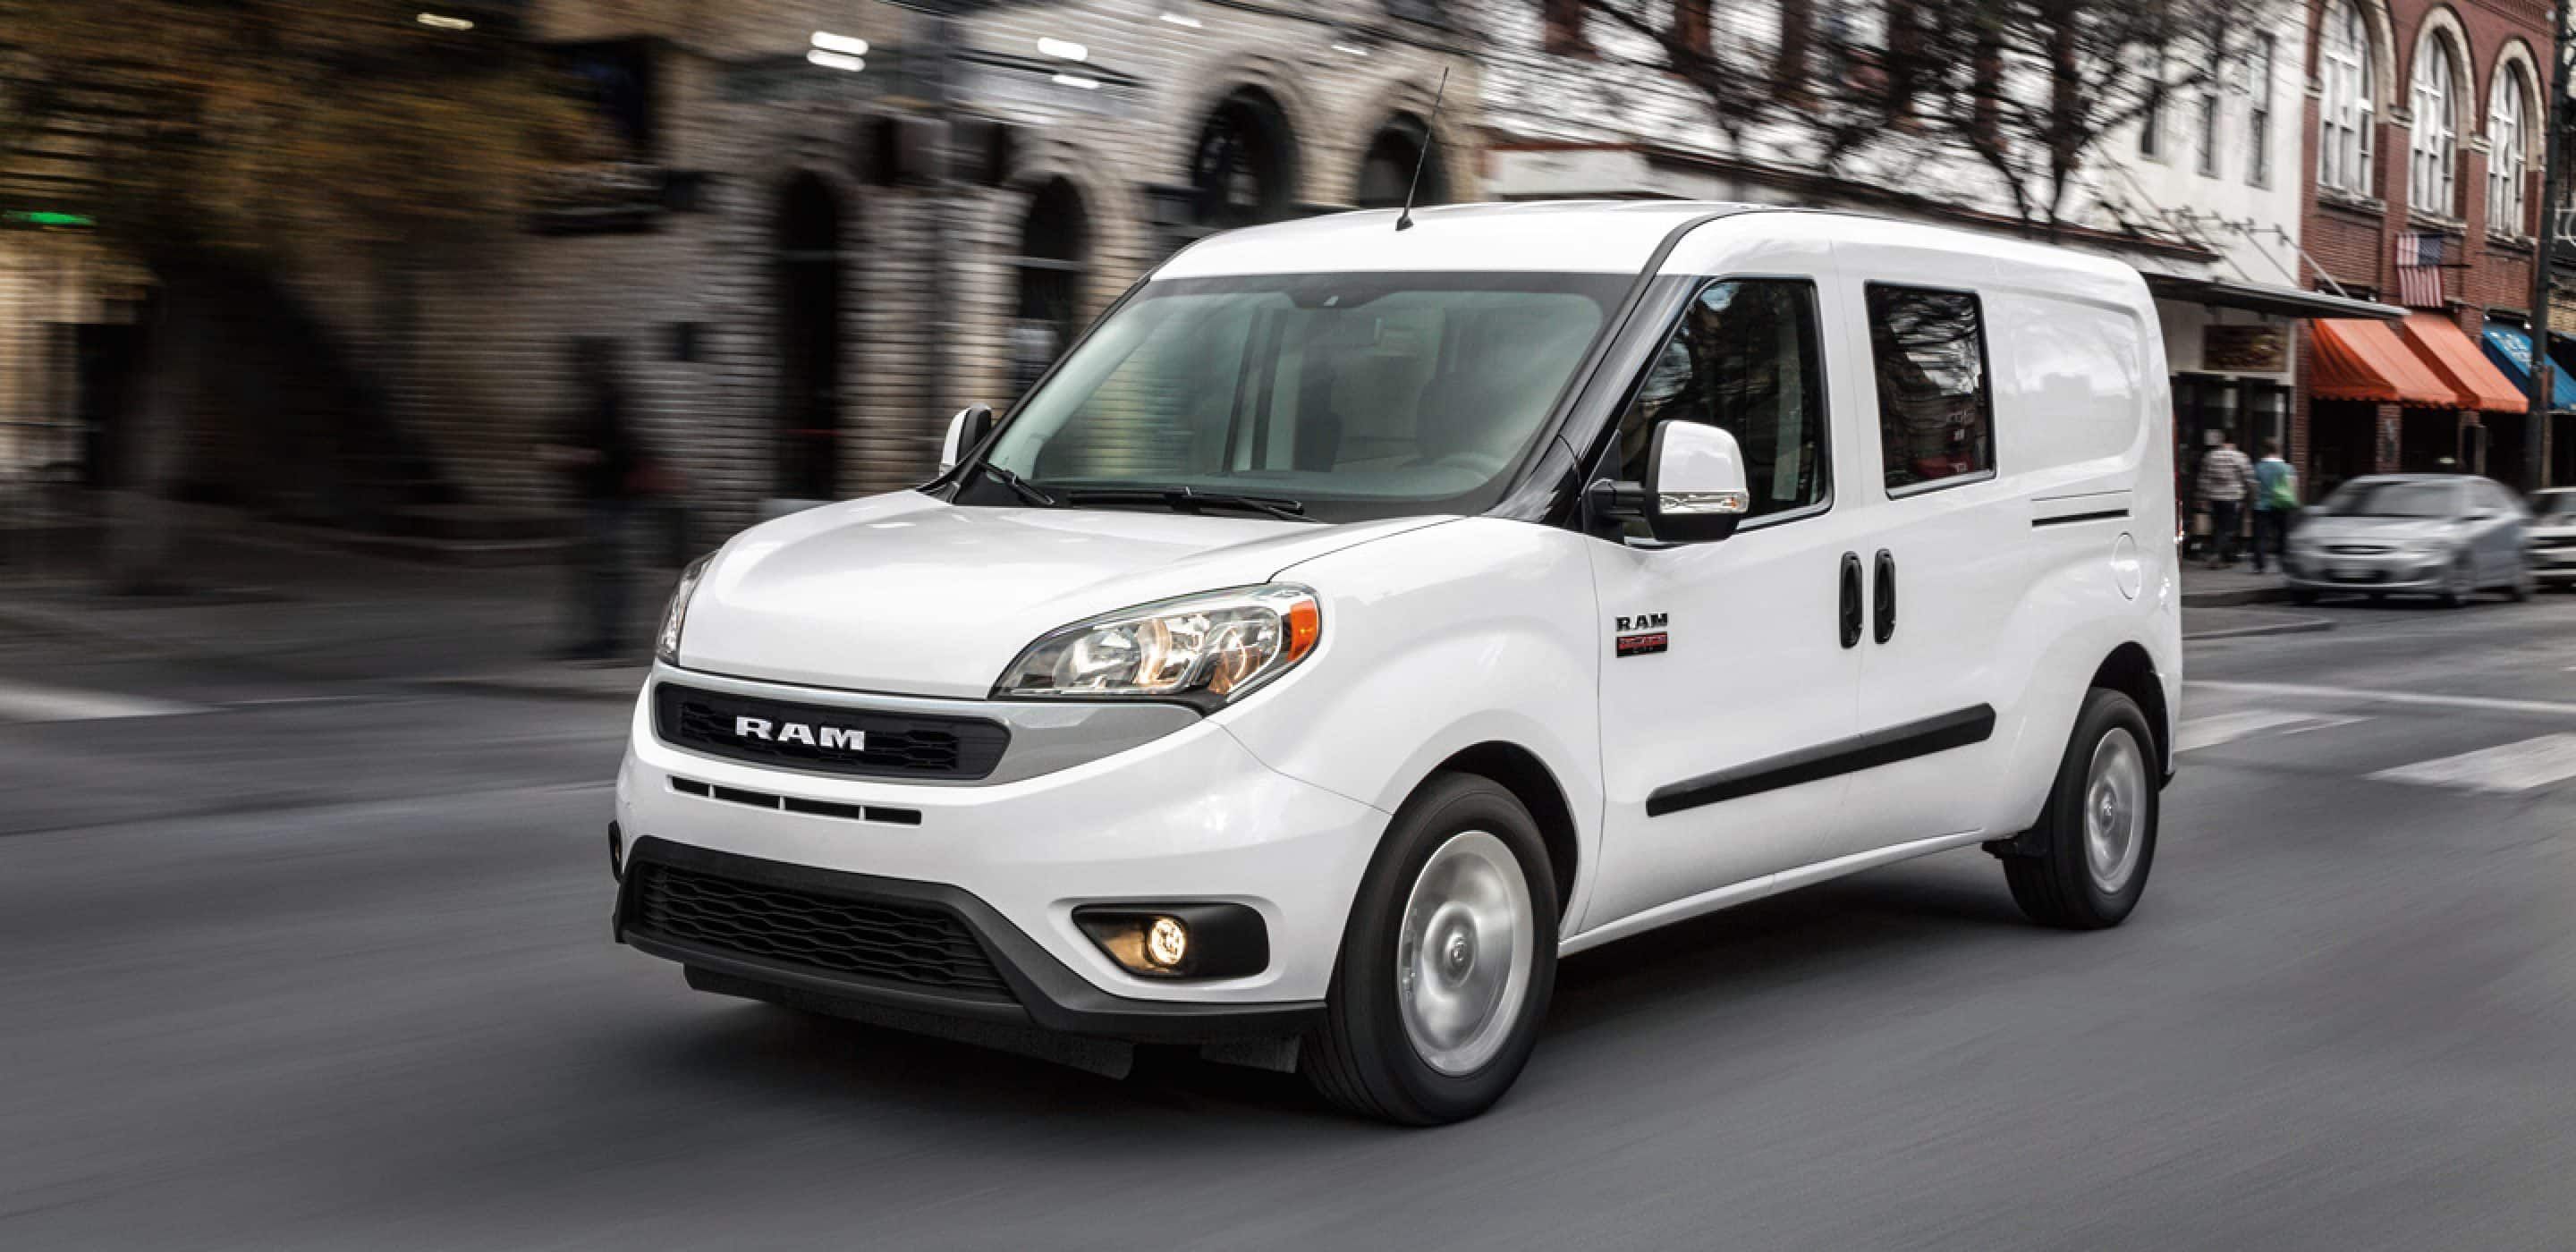 2021 Ram Promaster City Review Pricing